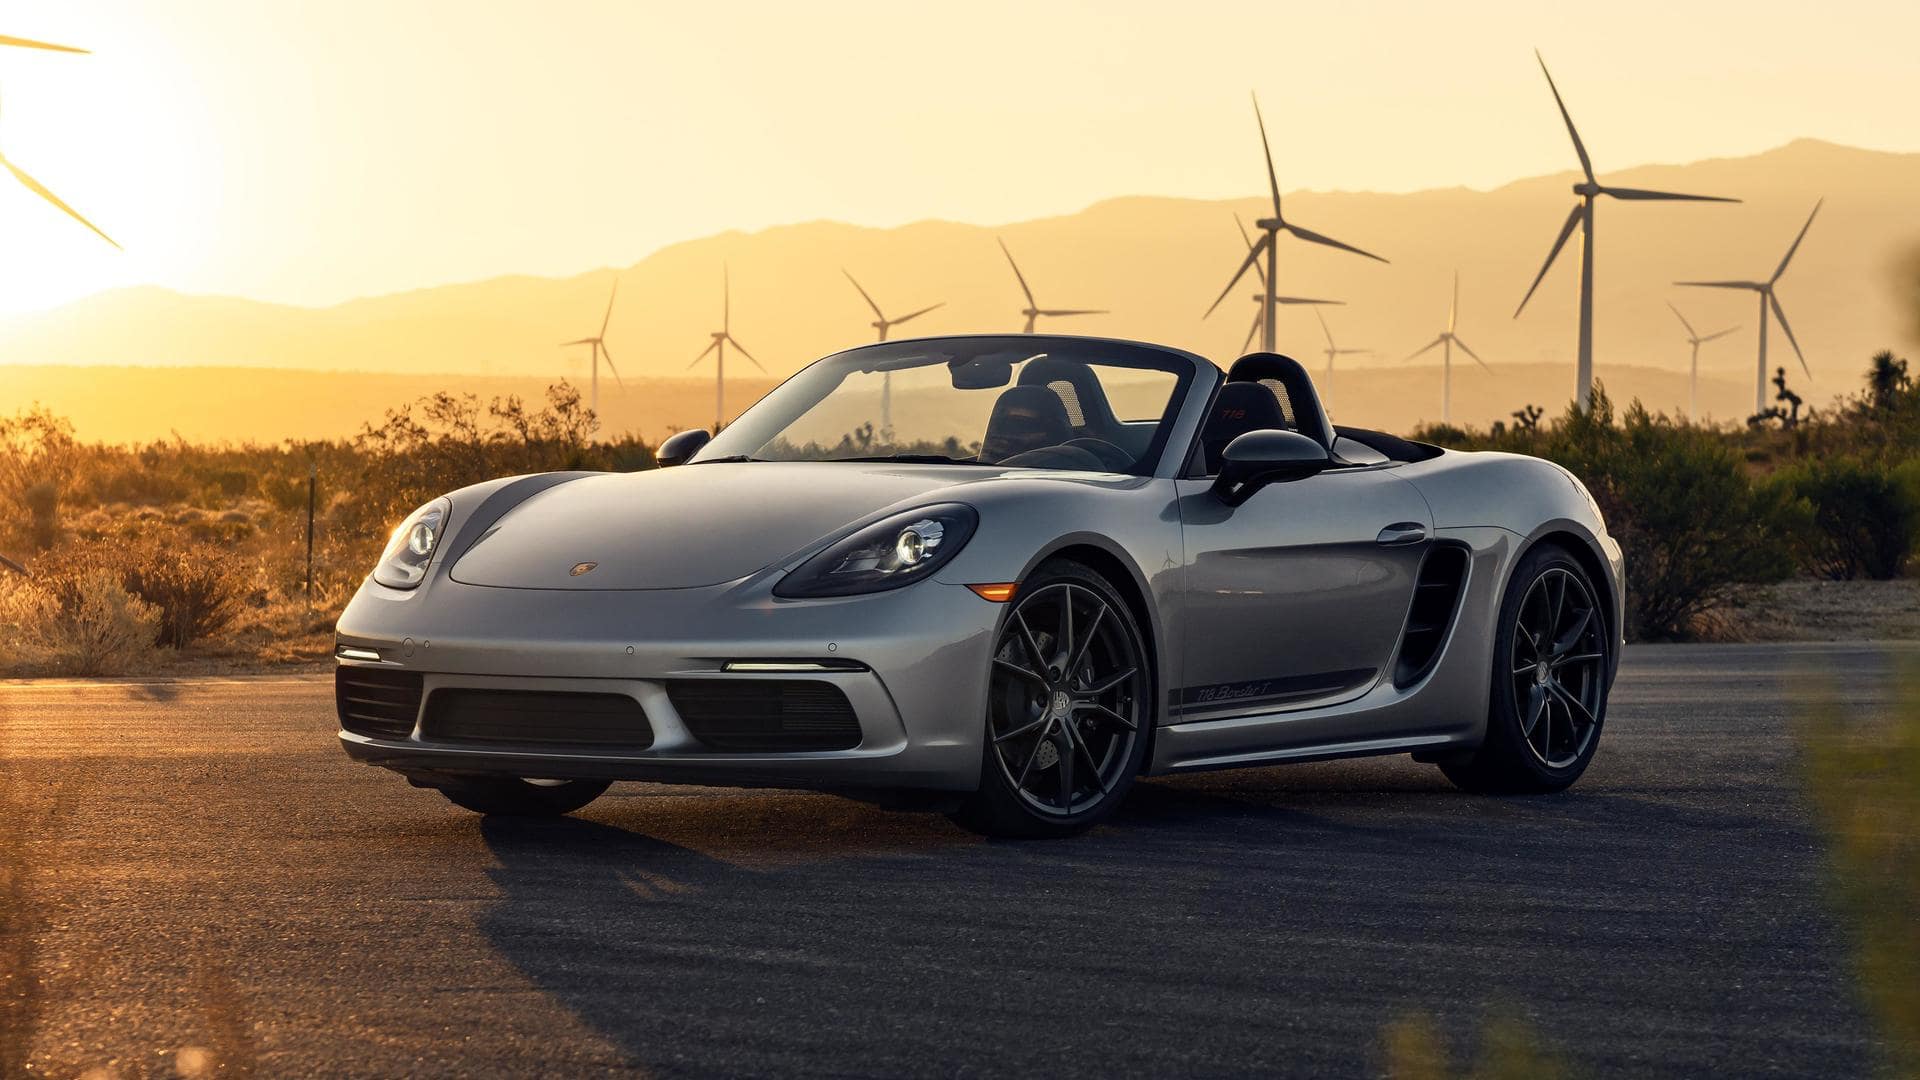 Porsche Boxster EV in the works: What should we expect